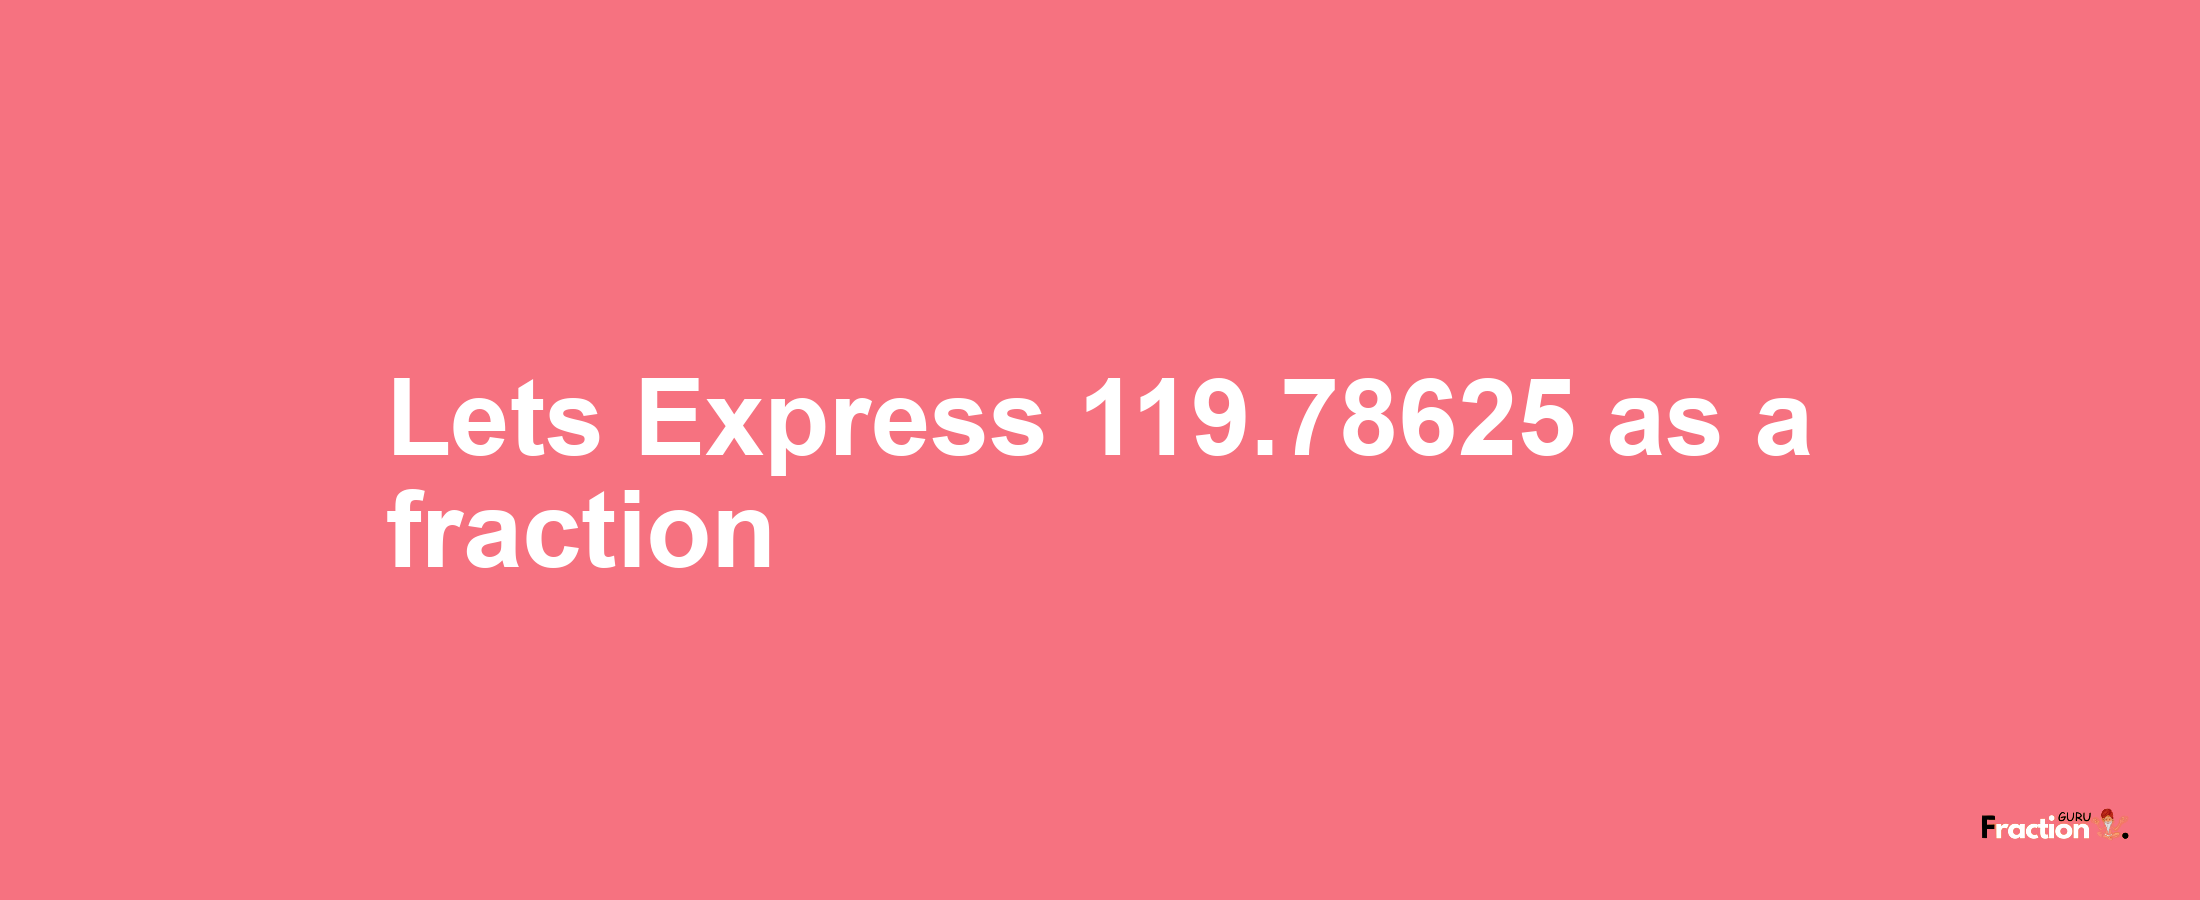 Lets Express 119.78625 as afraction